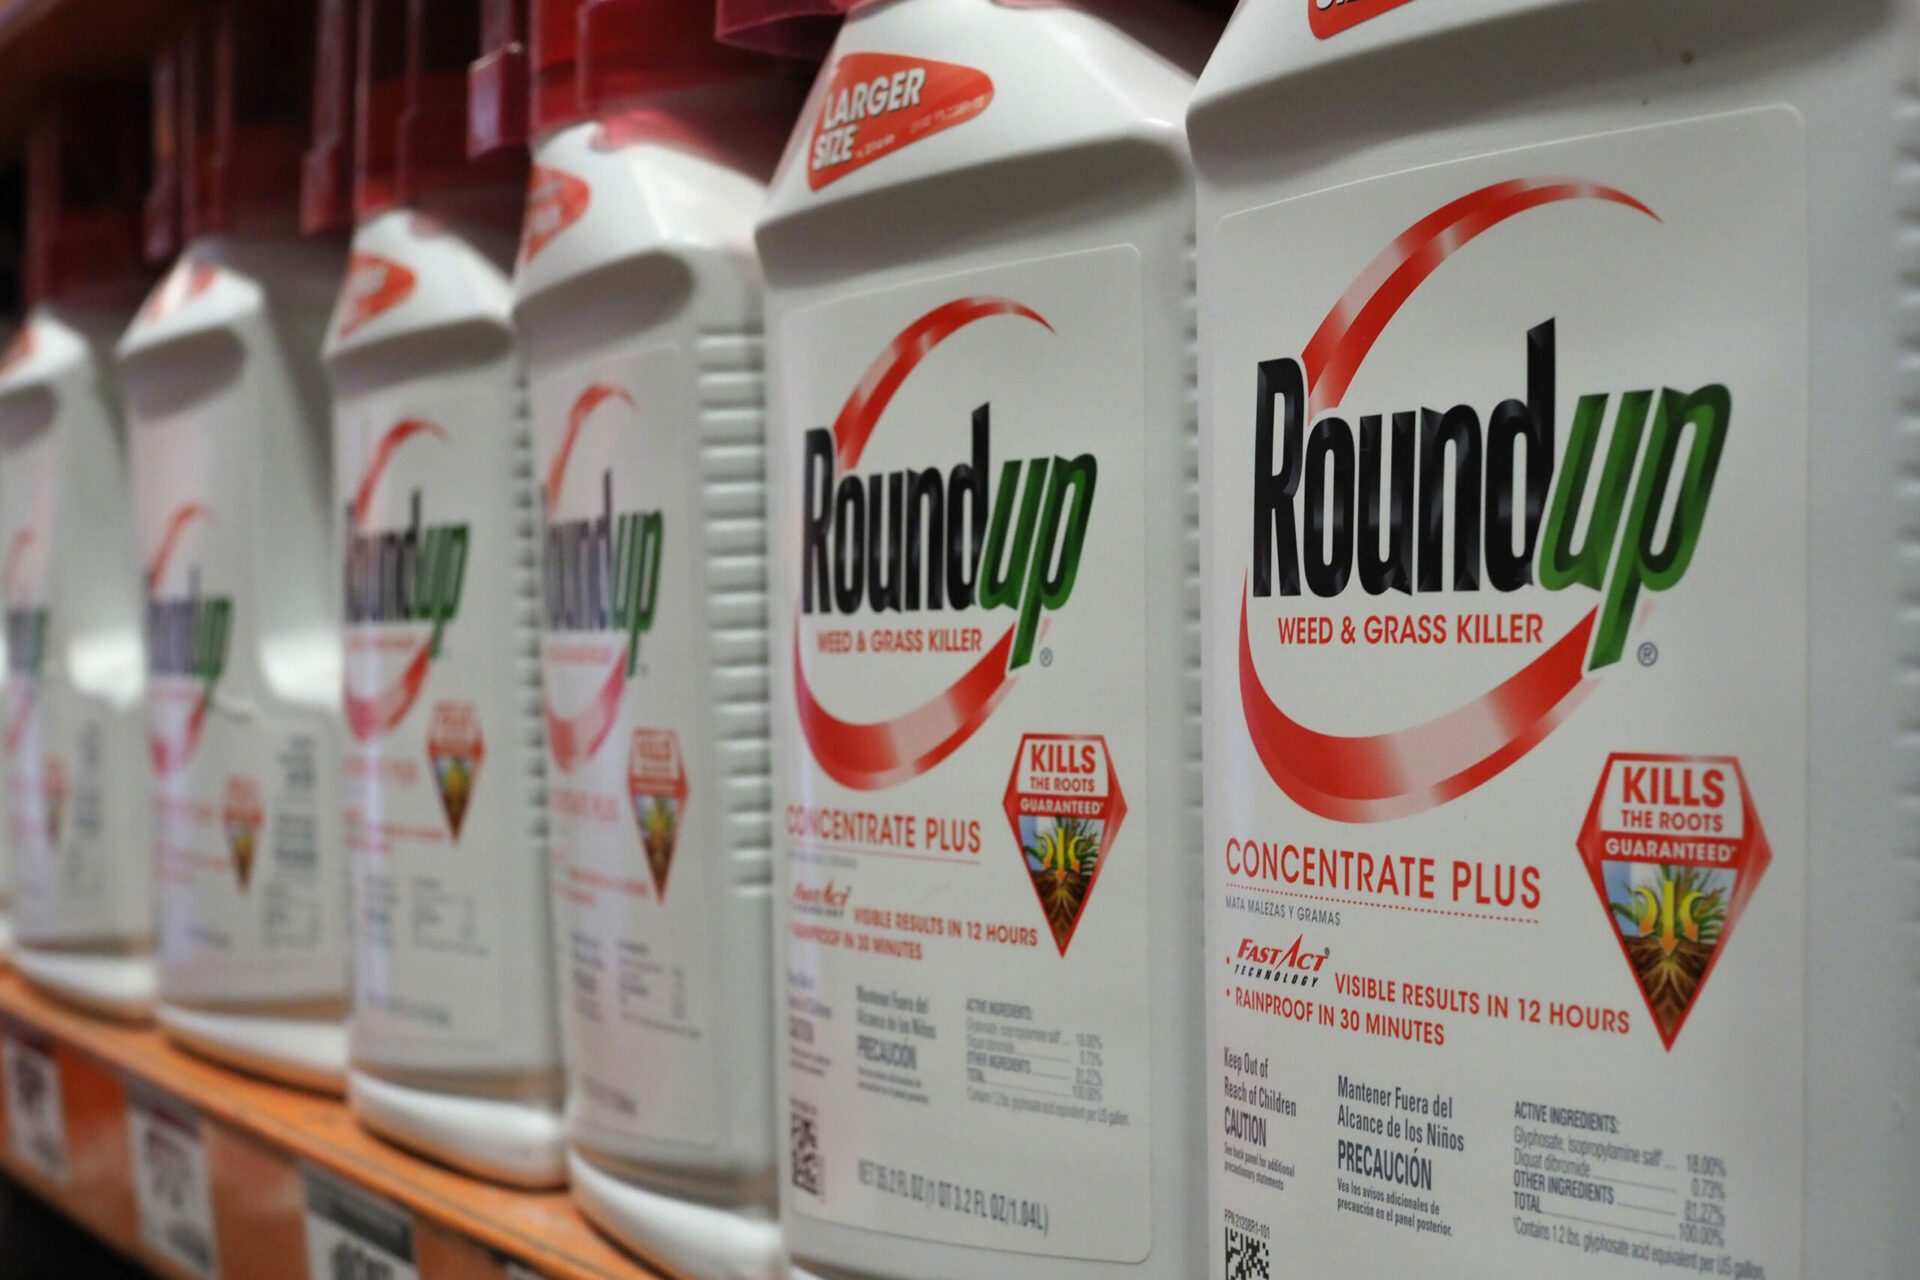 Monsanto ordered to pay $1.5 billion in Roundup case